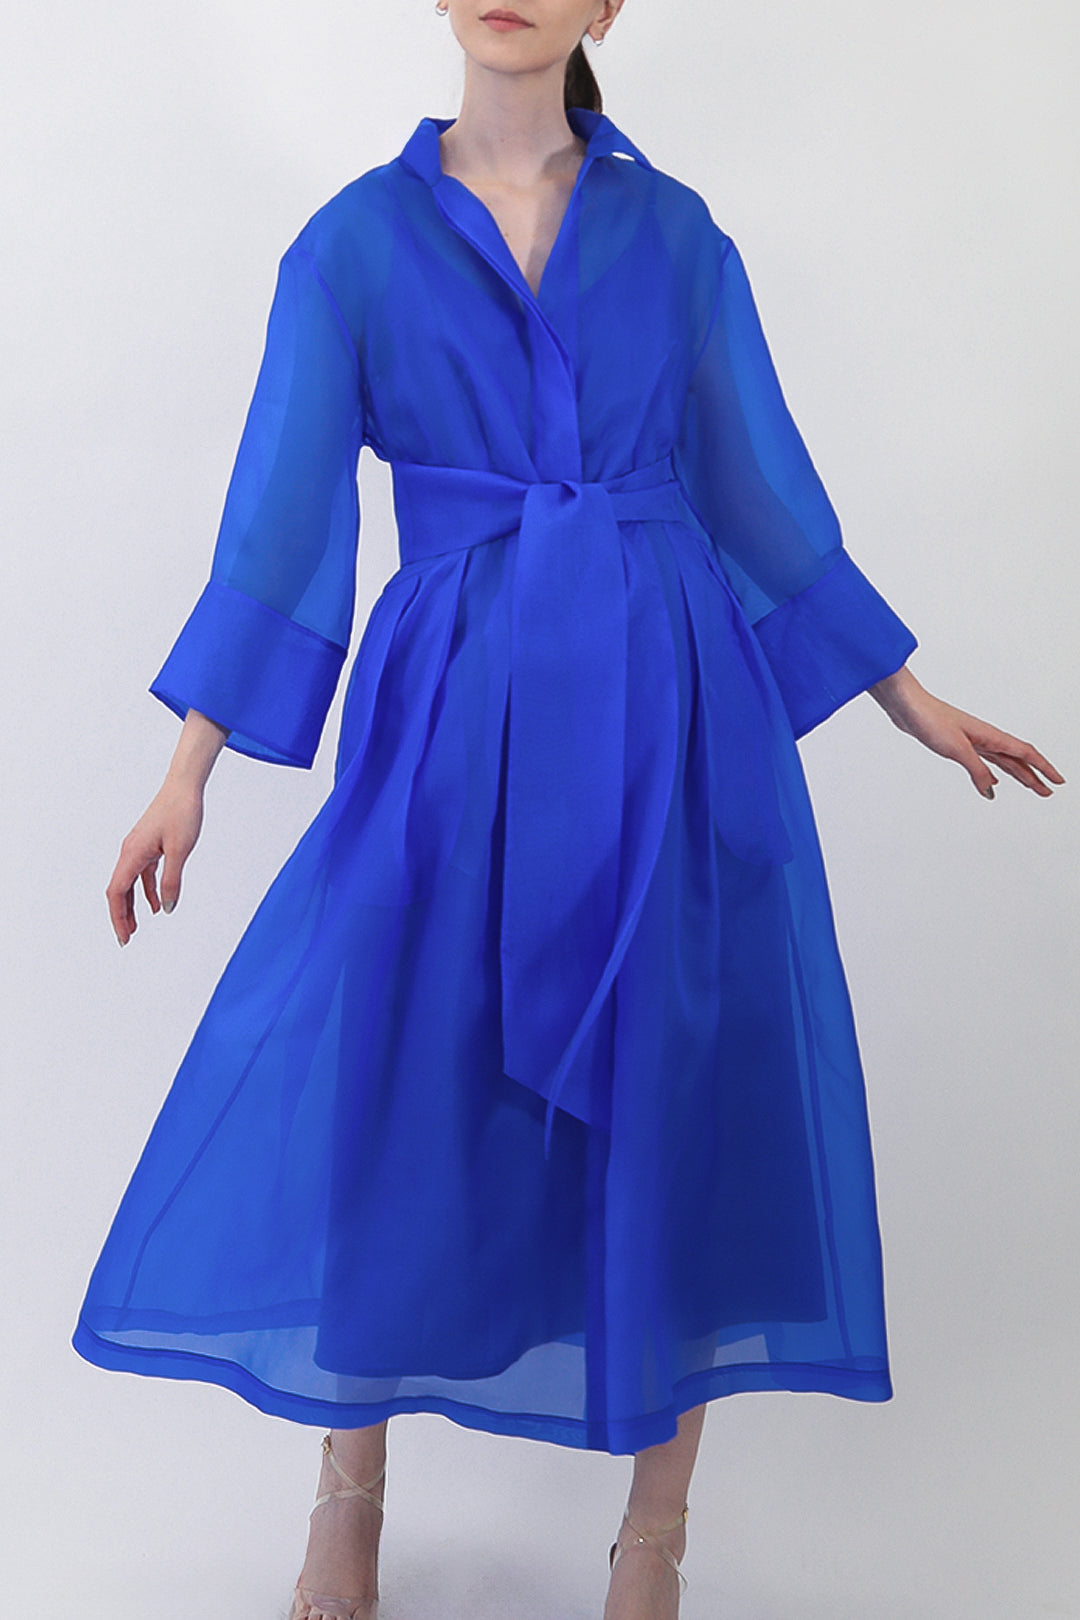 GABRIELLE DRESS IN SILK ORGANZA IMPERIAL BLUE - PRE-ORDER AVAILABLE